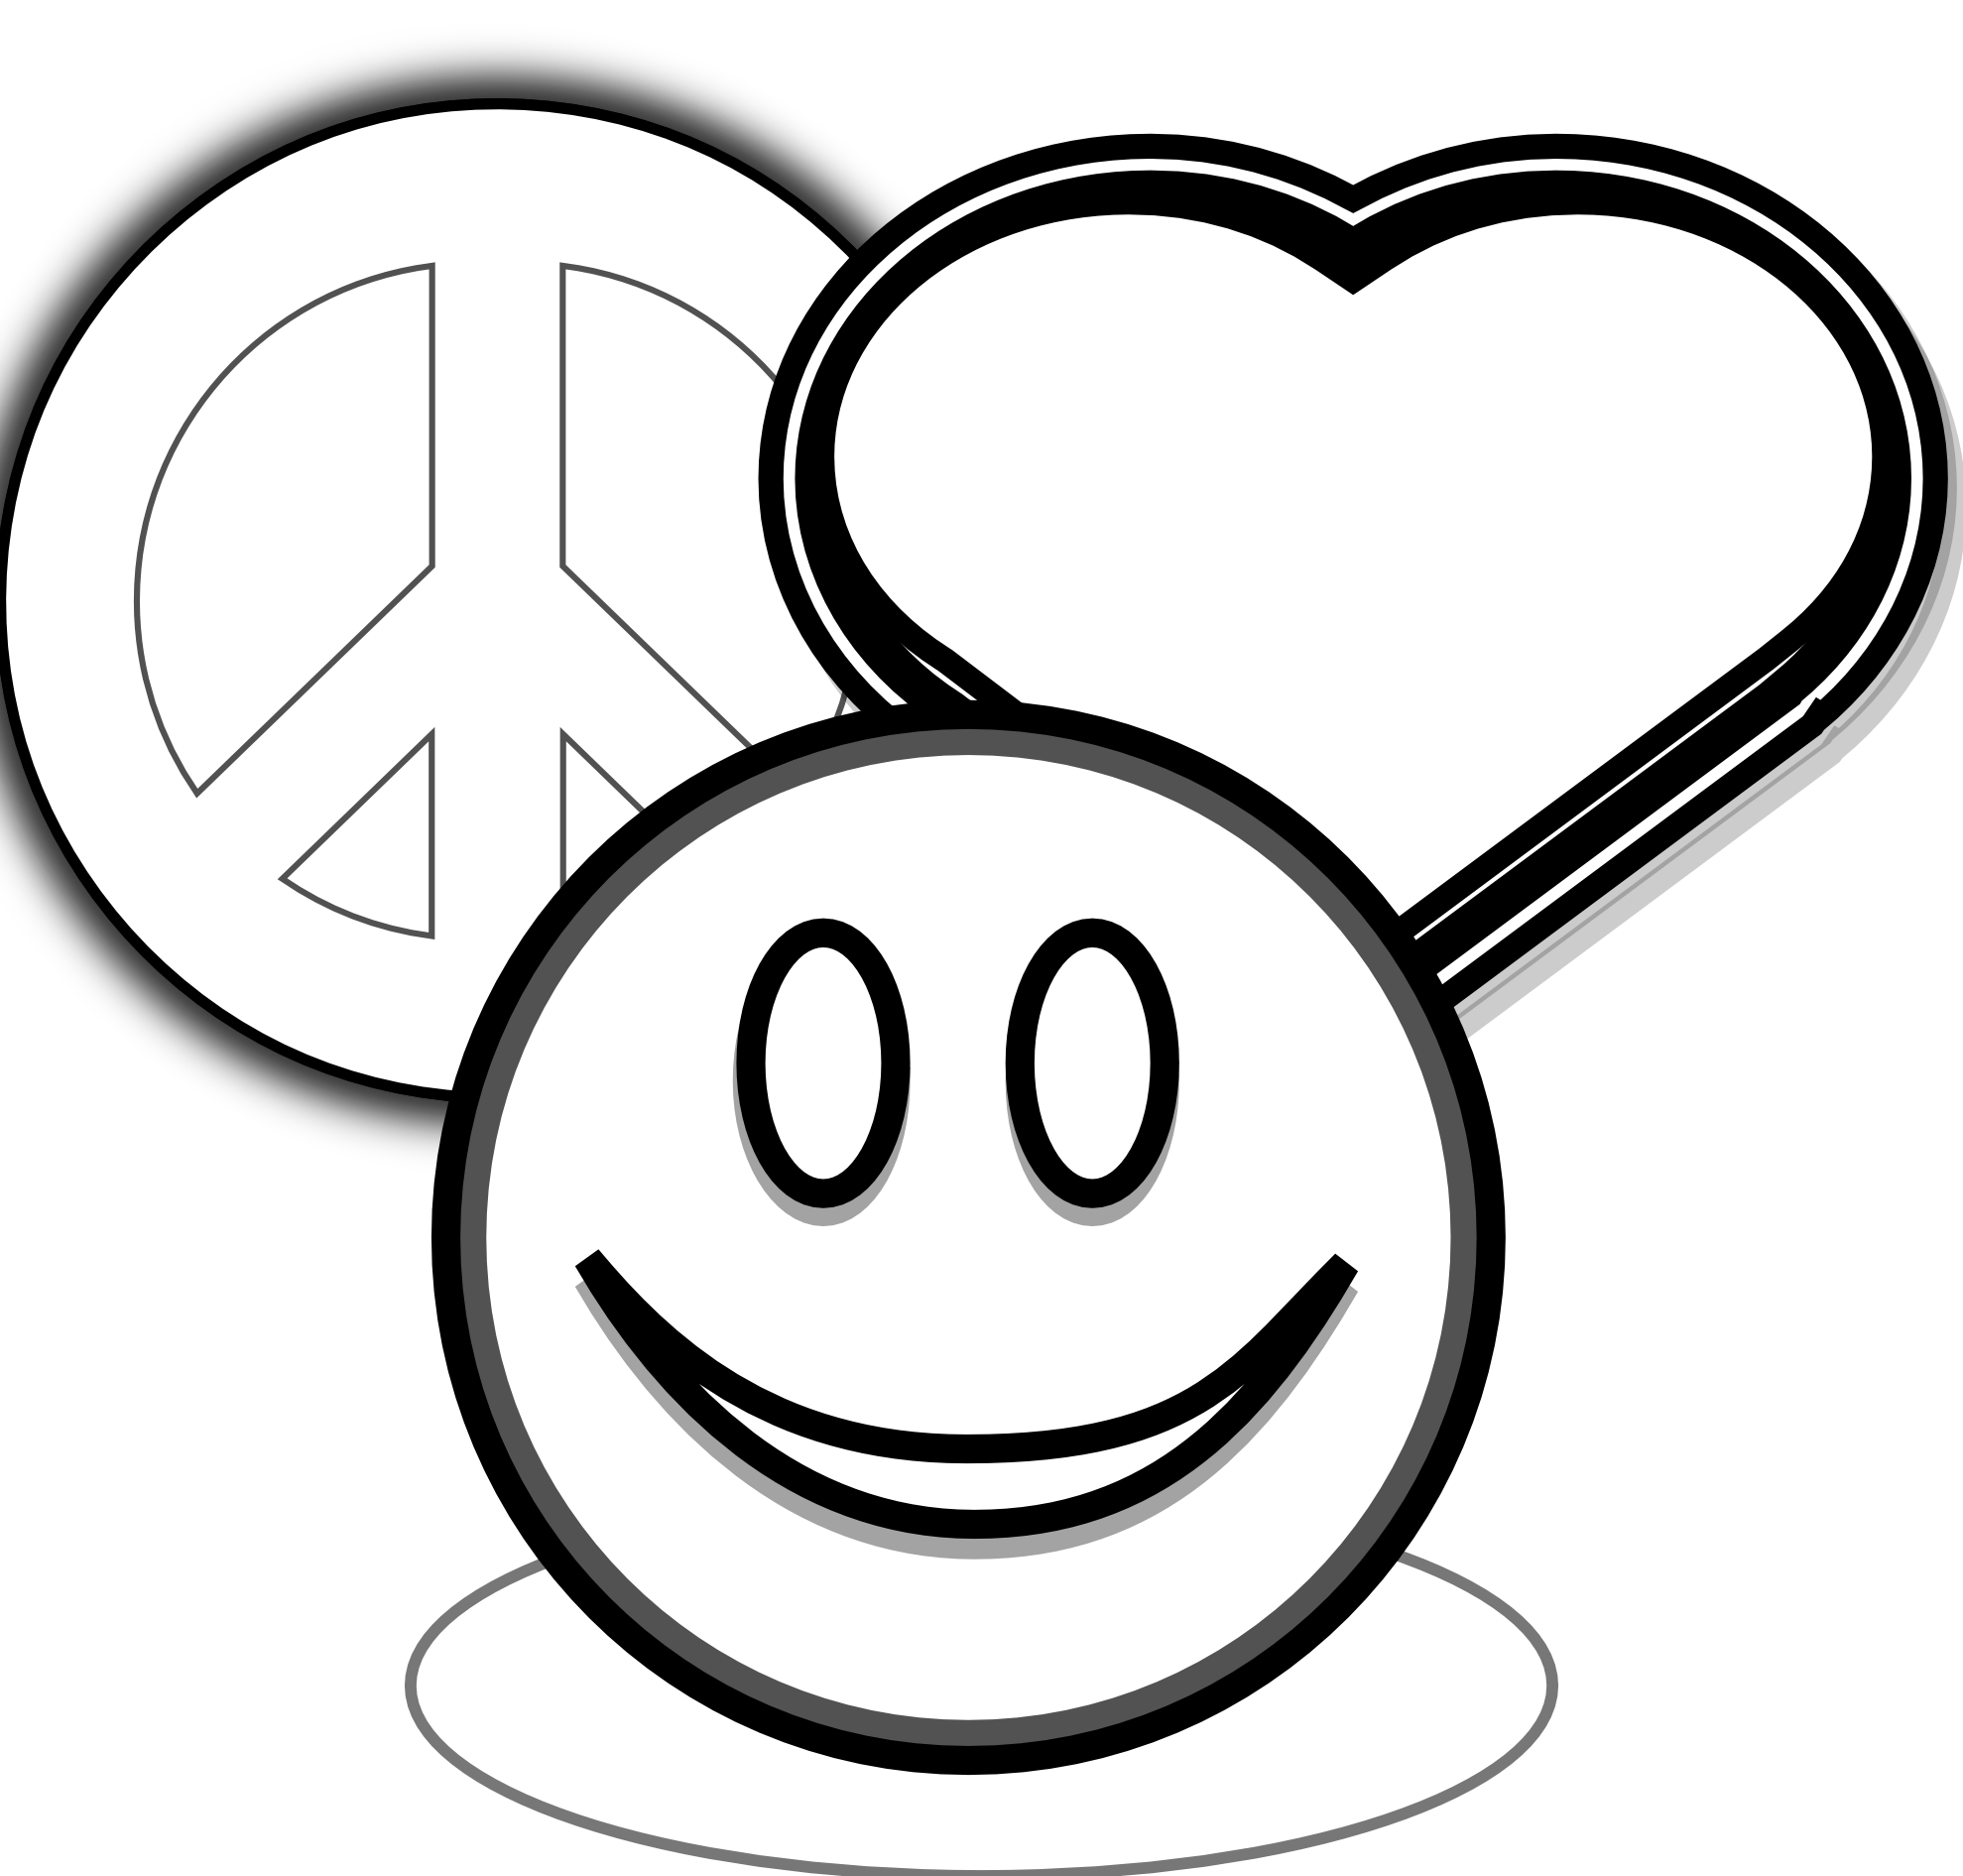 12 Pics of Printable Coloring Pages Peace And Love - Free ...